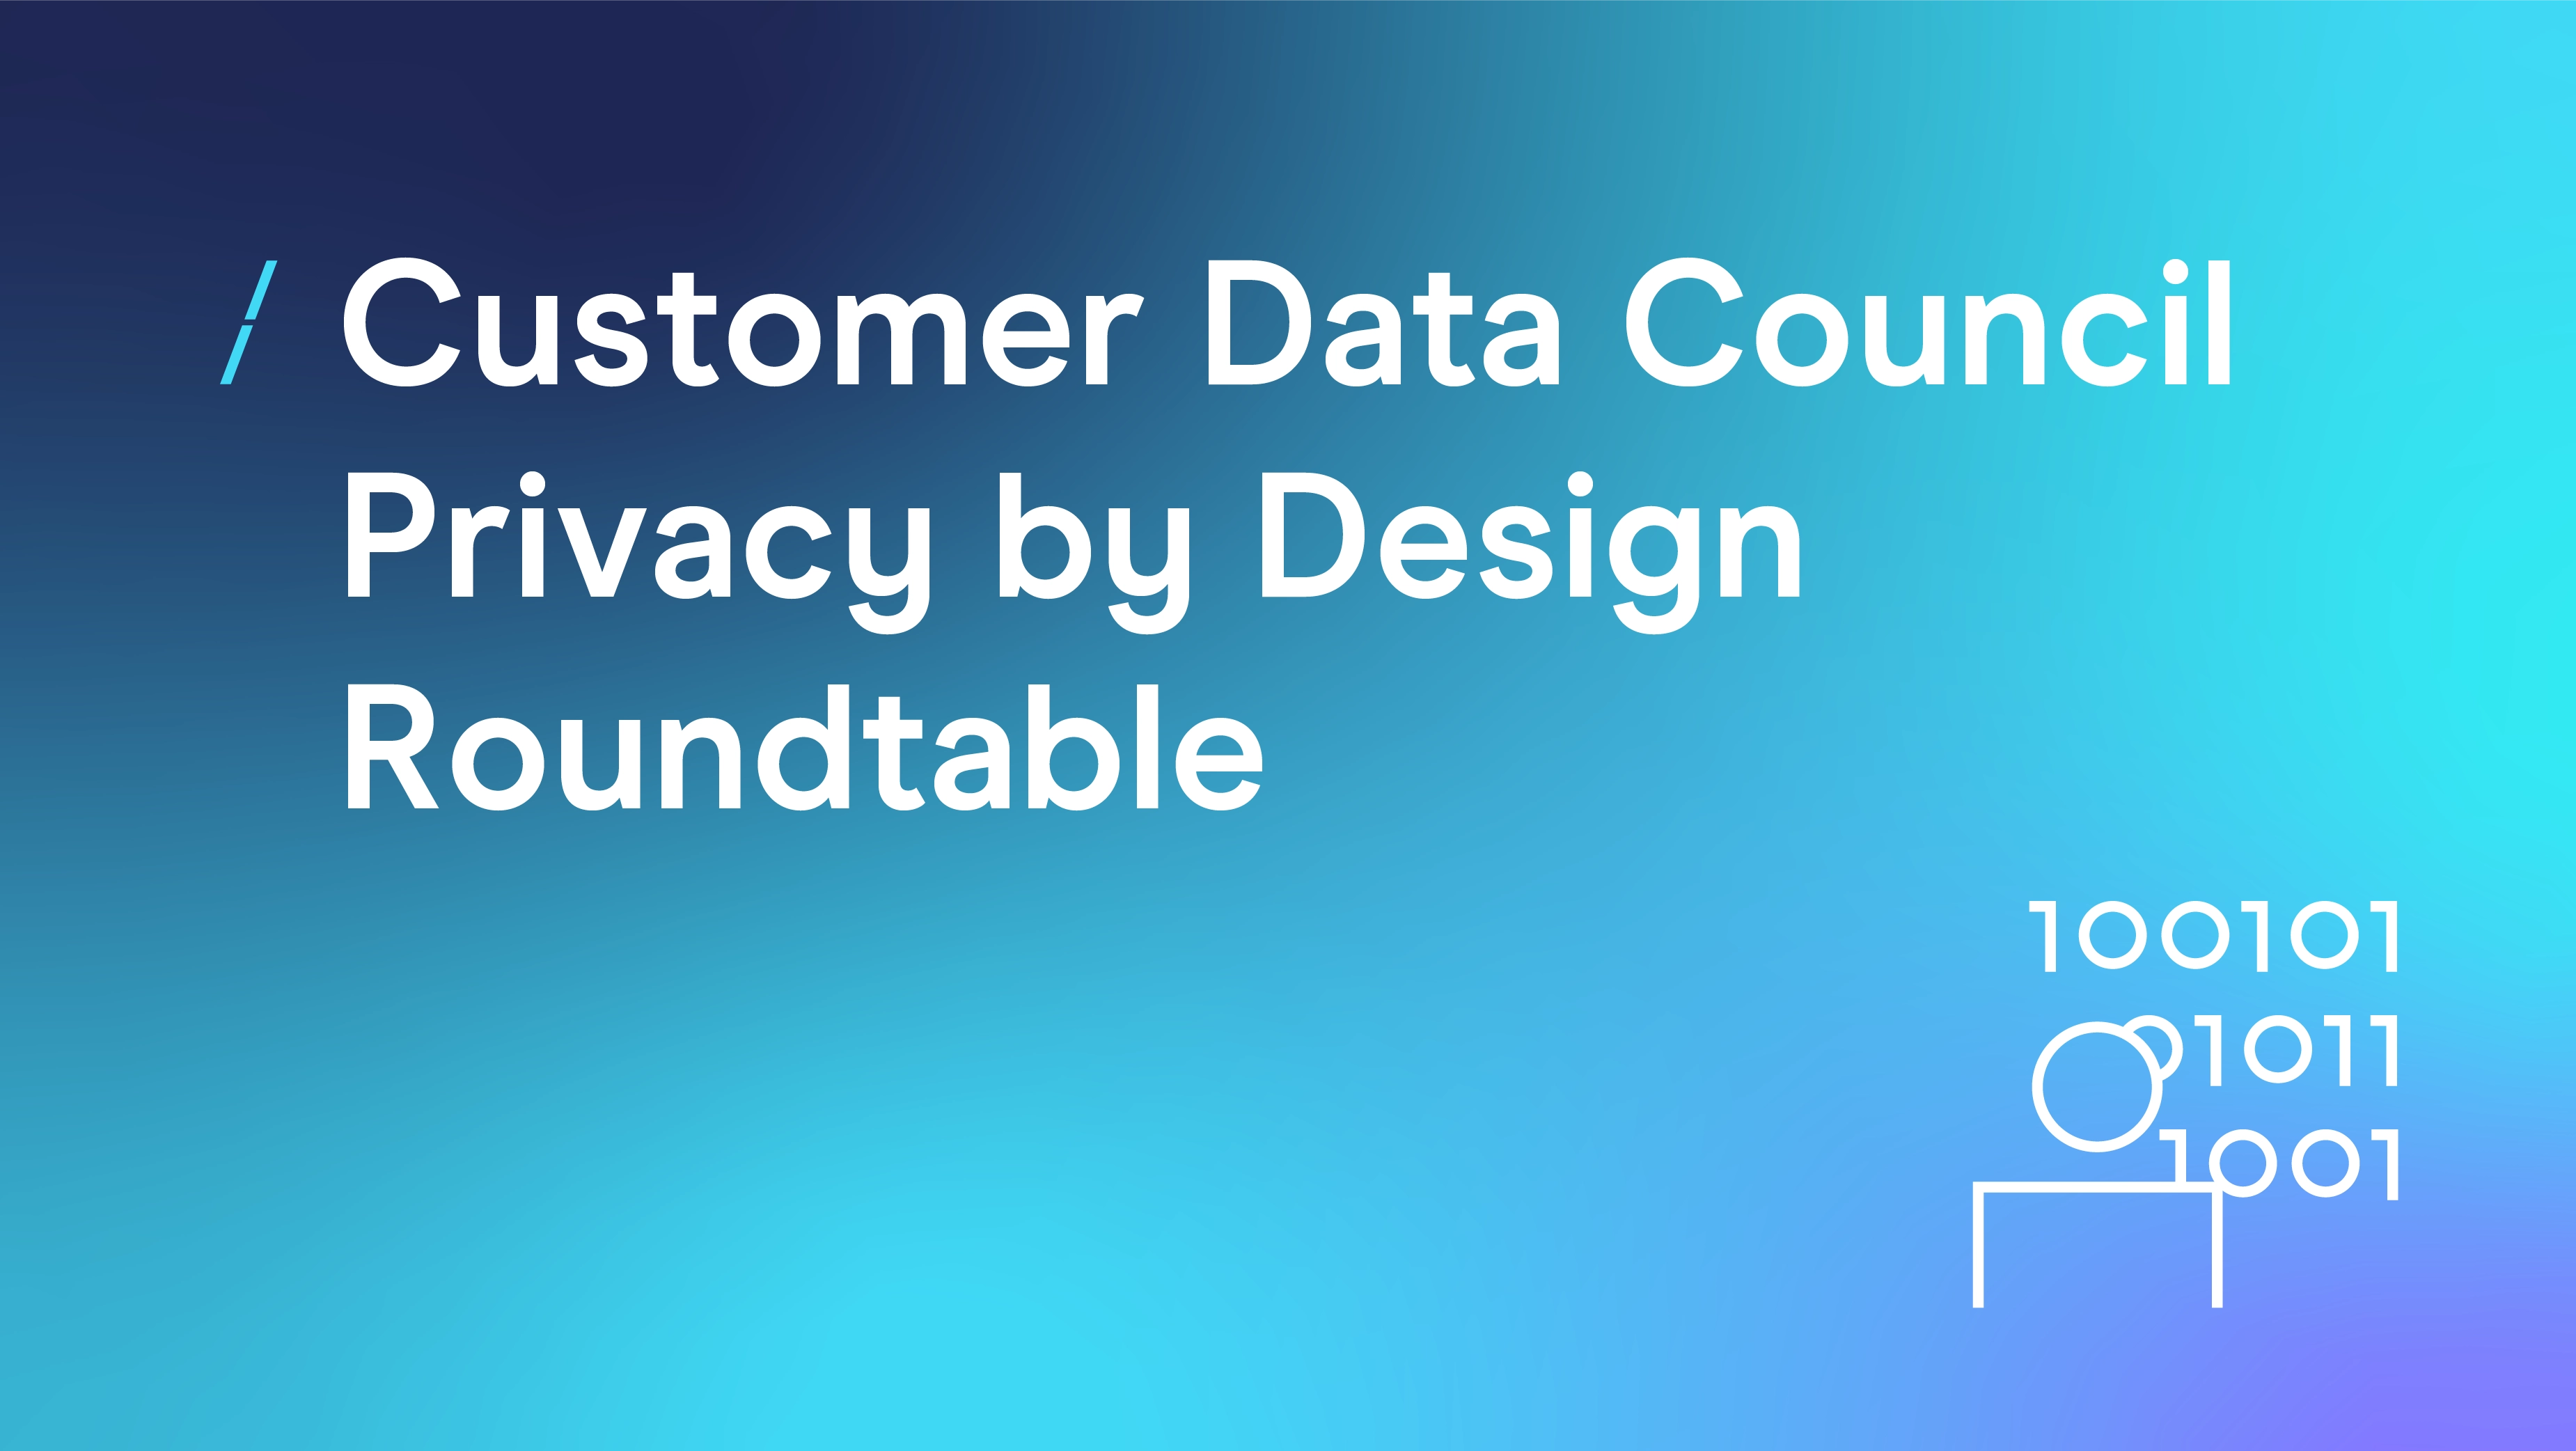 Customer Data Council Privacy by Design Roundtable_Customer Data Council.png